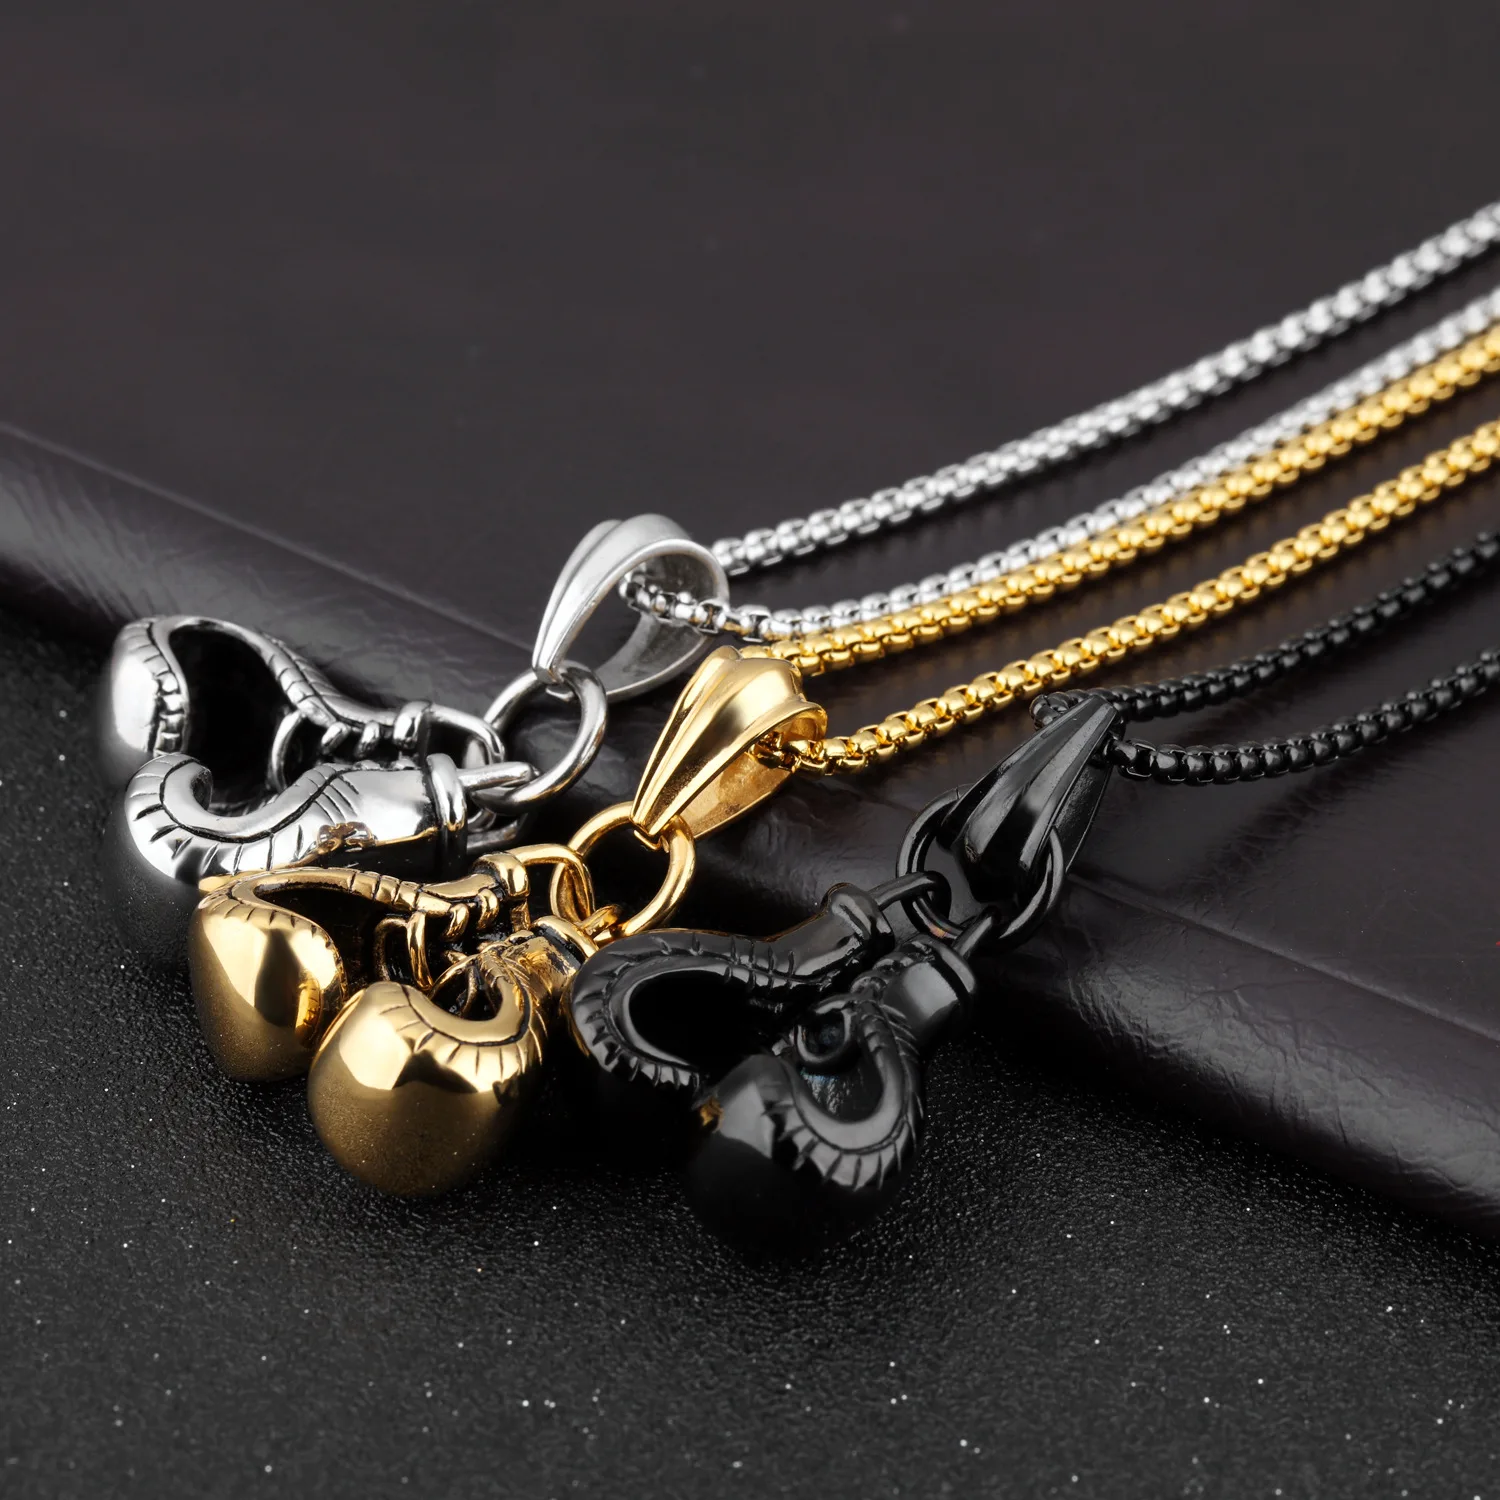 

Jessy Fashion 2021 New Designer Jewelry Stainless Steel Necklace Classical Men Hip-Hop Boxer Box Necklace, As shown